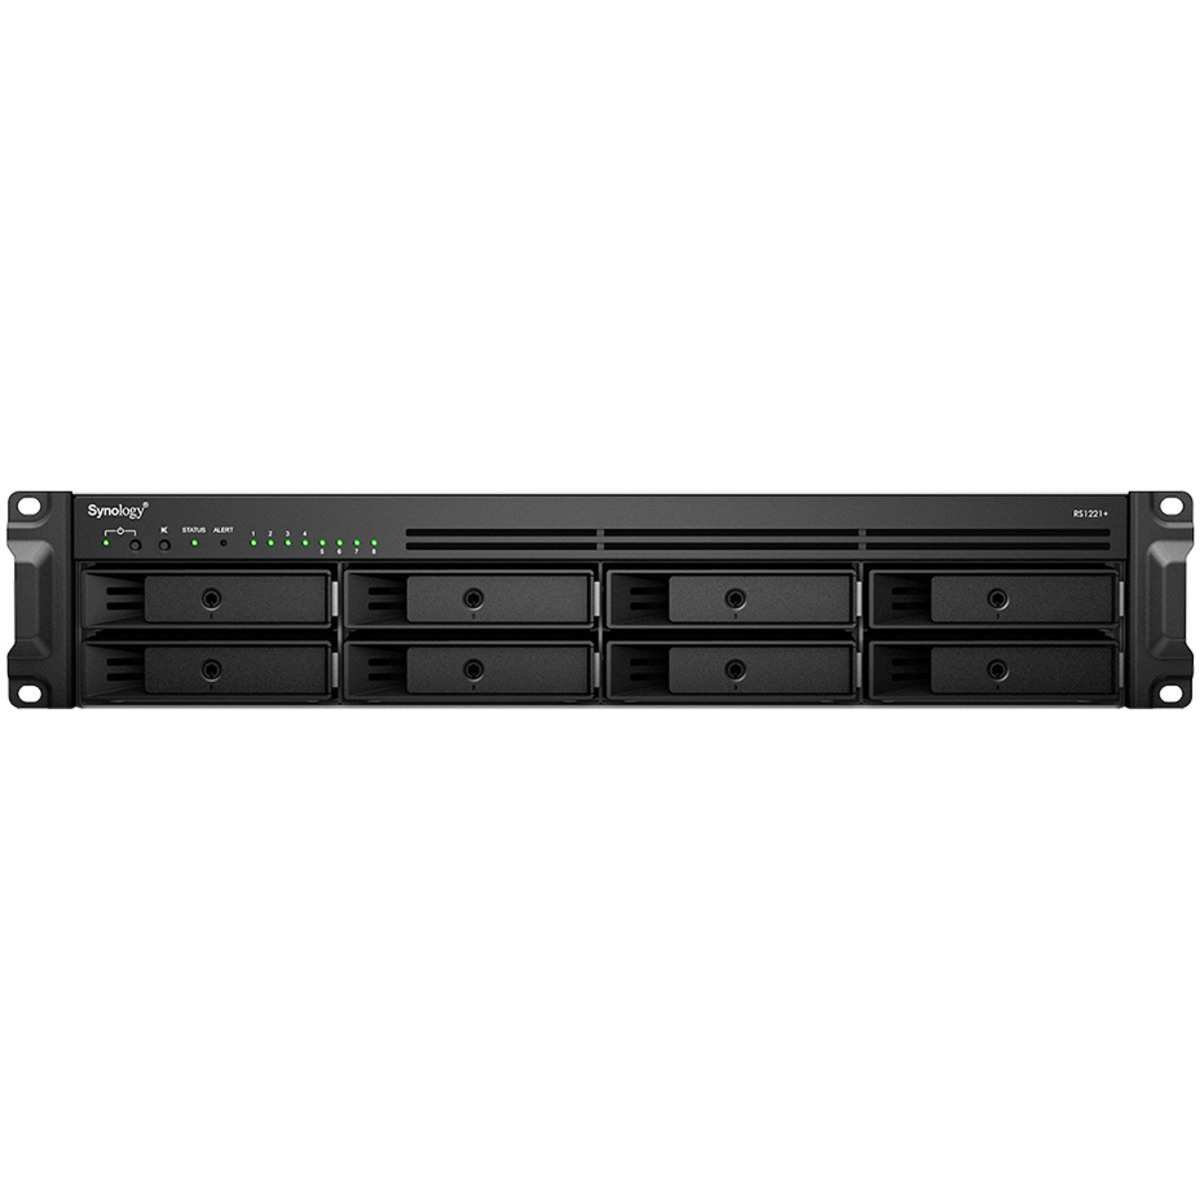 Synology RackStation RS1221+ 2tb 8-Bay RackMount Multimedia / Power User / Business NAS - Network Attached Storage Device 4x500gb Western Digital Red SA500 WDS500G1R0A 2.5 560/530MB/s SATA 6Gb/s SSD NAS Class Drives Installed - Burn-In Tested RackStation RS1221+